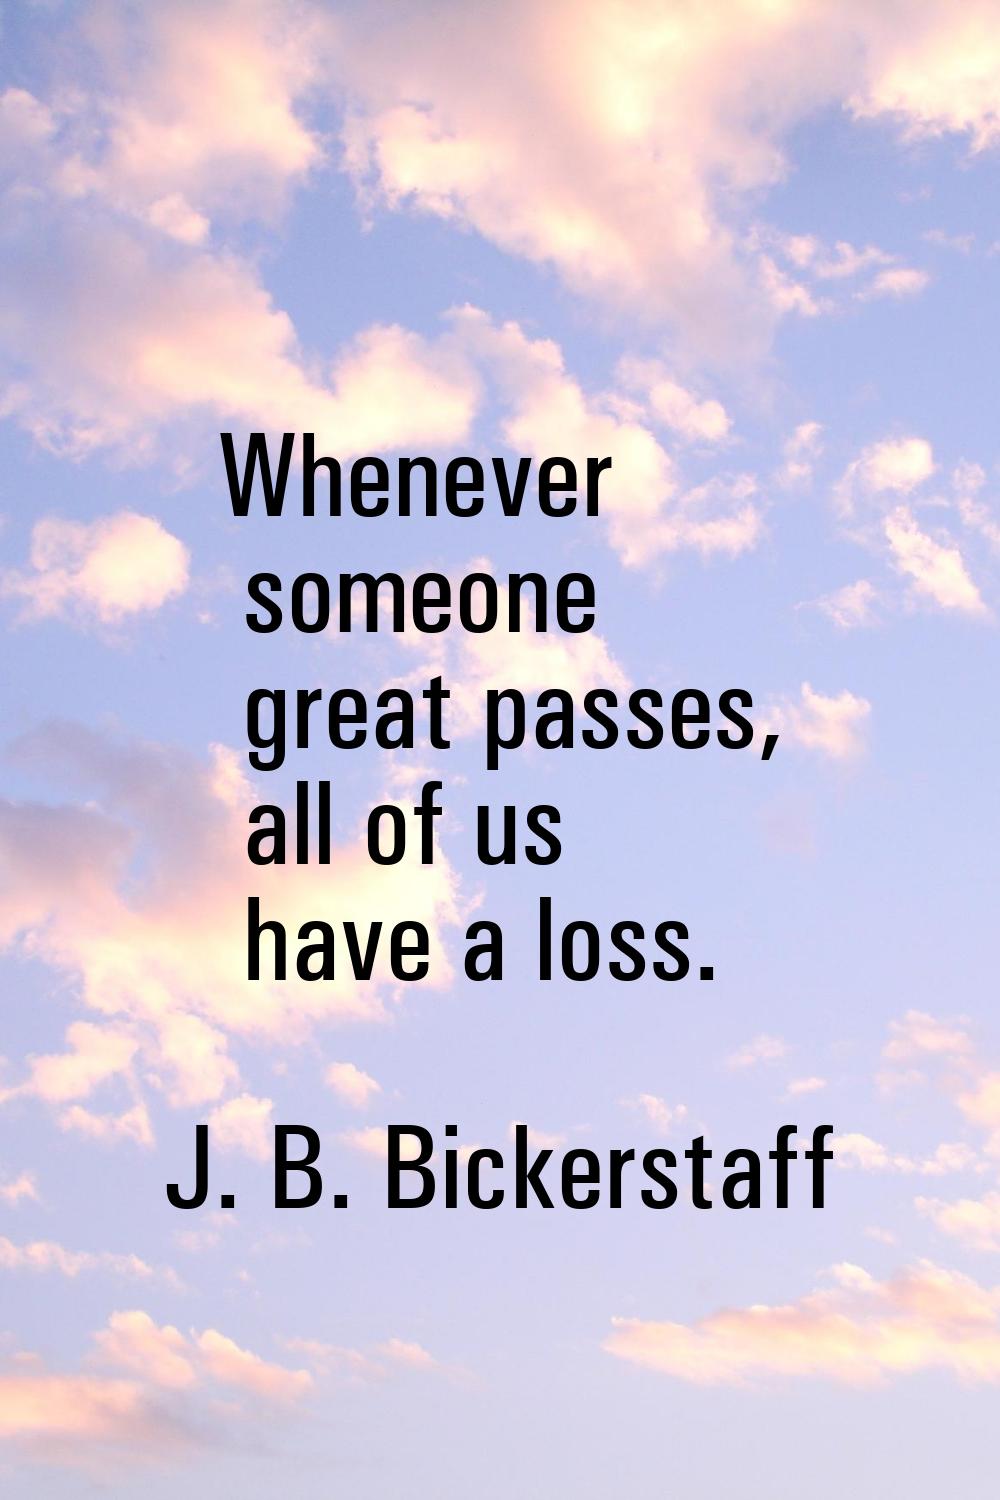 Whenever someone great passes, all of us have a loss.